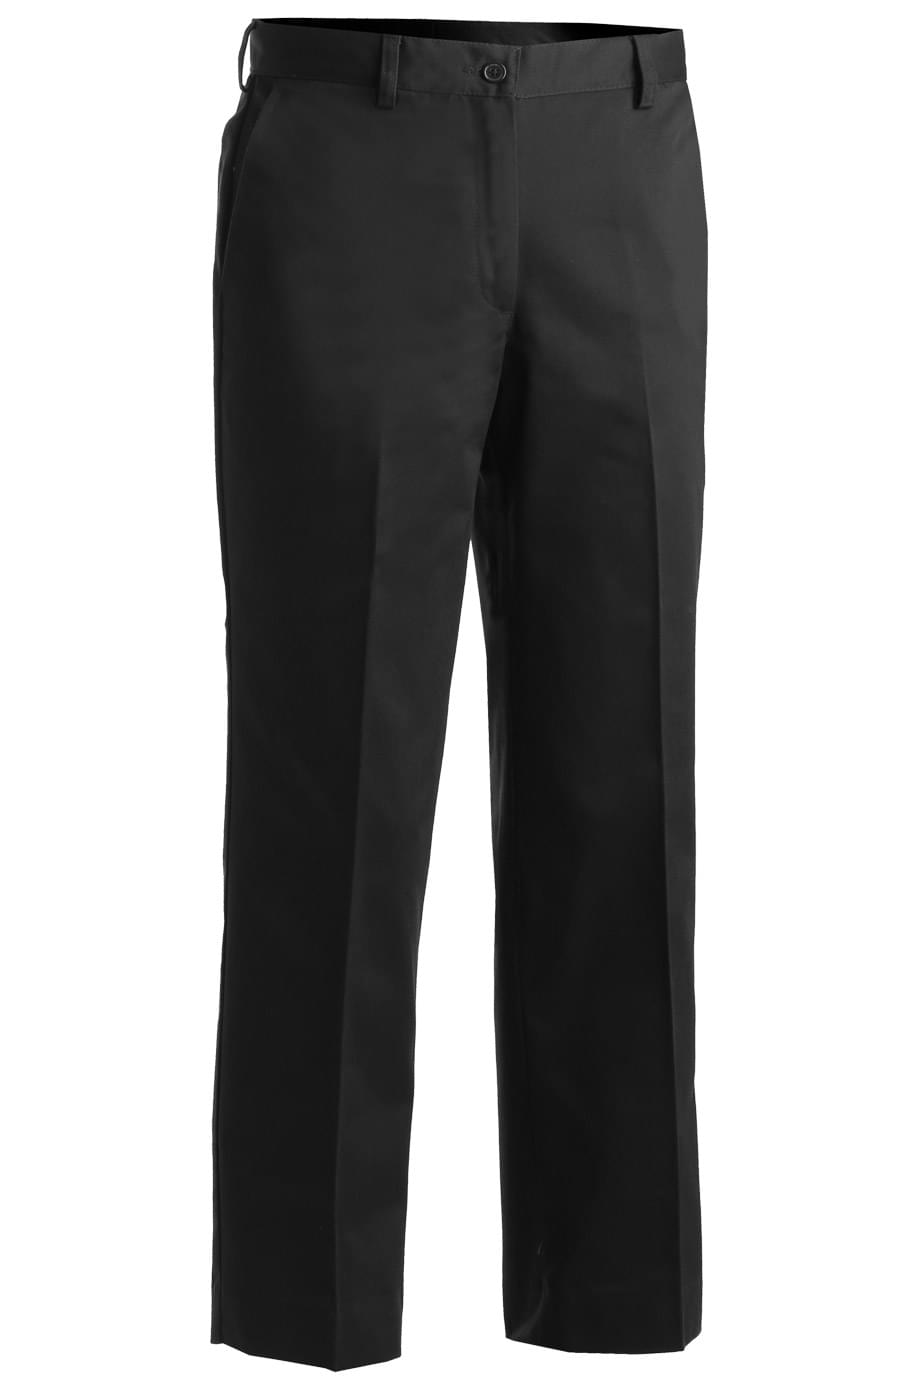 BLENDED CHINO FLAT FRONT PANT